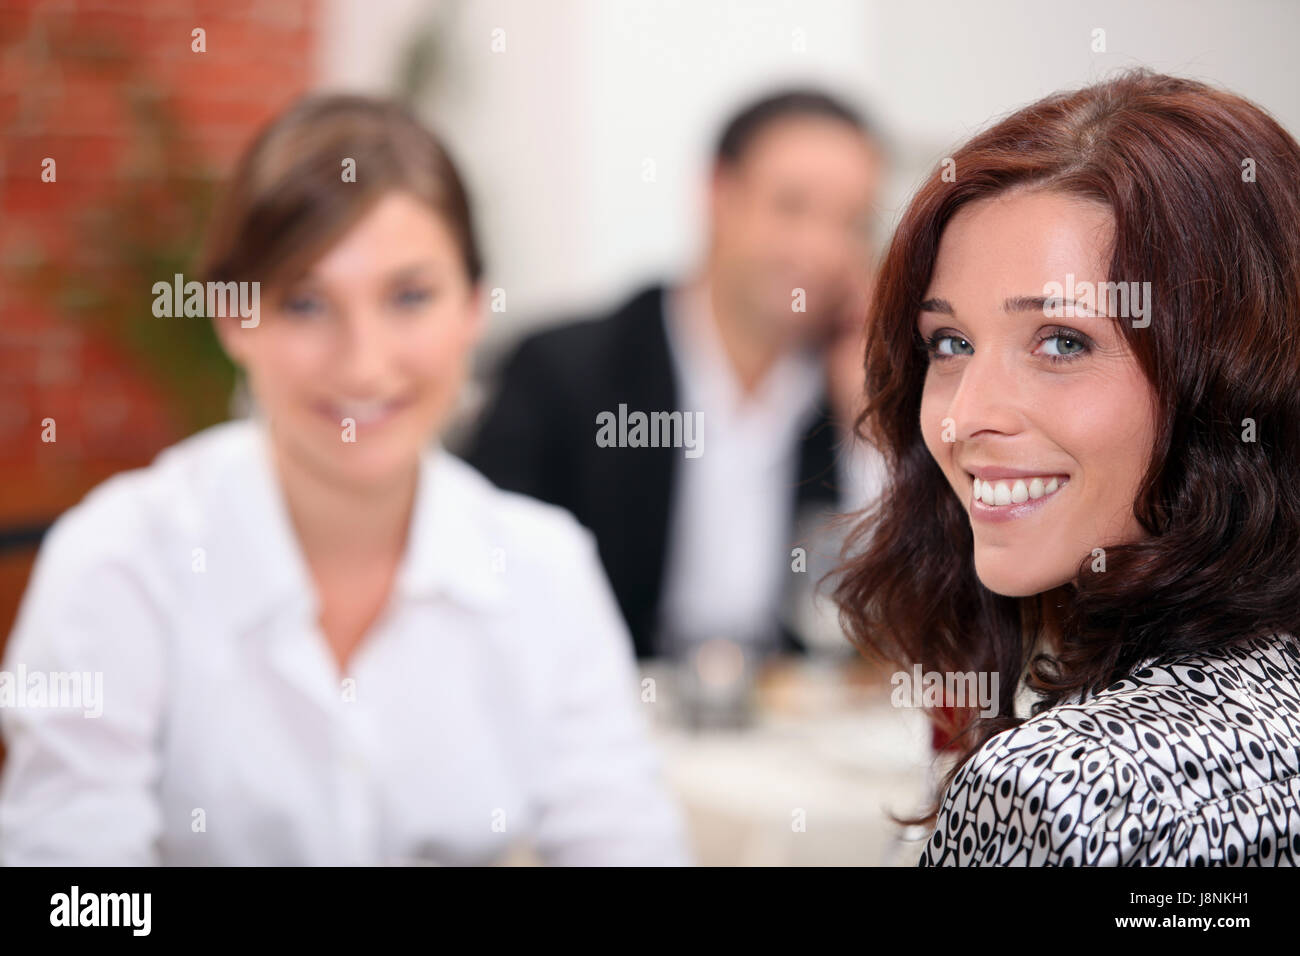 cafe, beautiful, beauteously, nice, adult, business dealings, deal, business Stock Photo